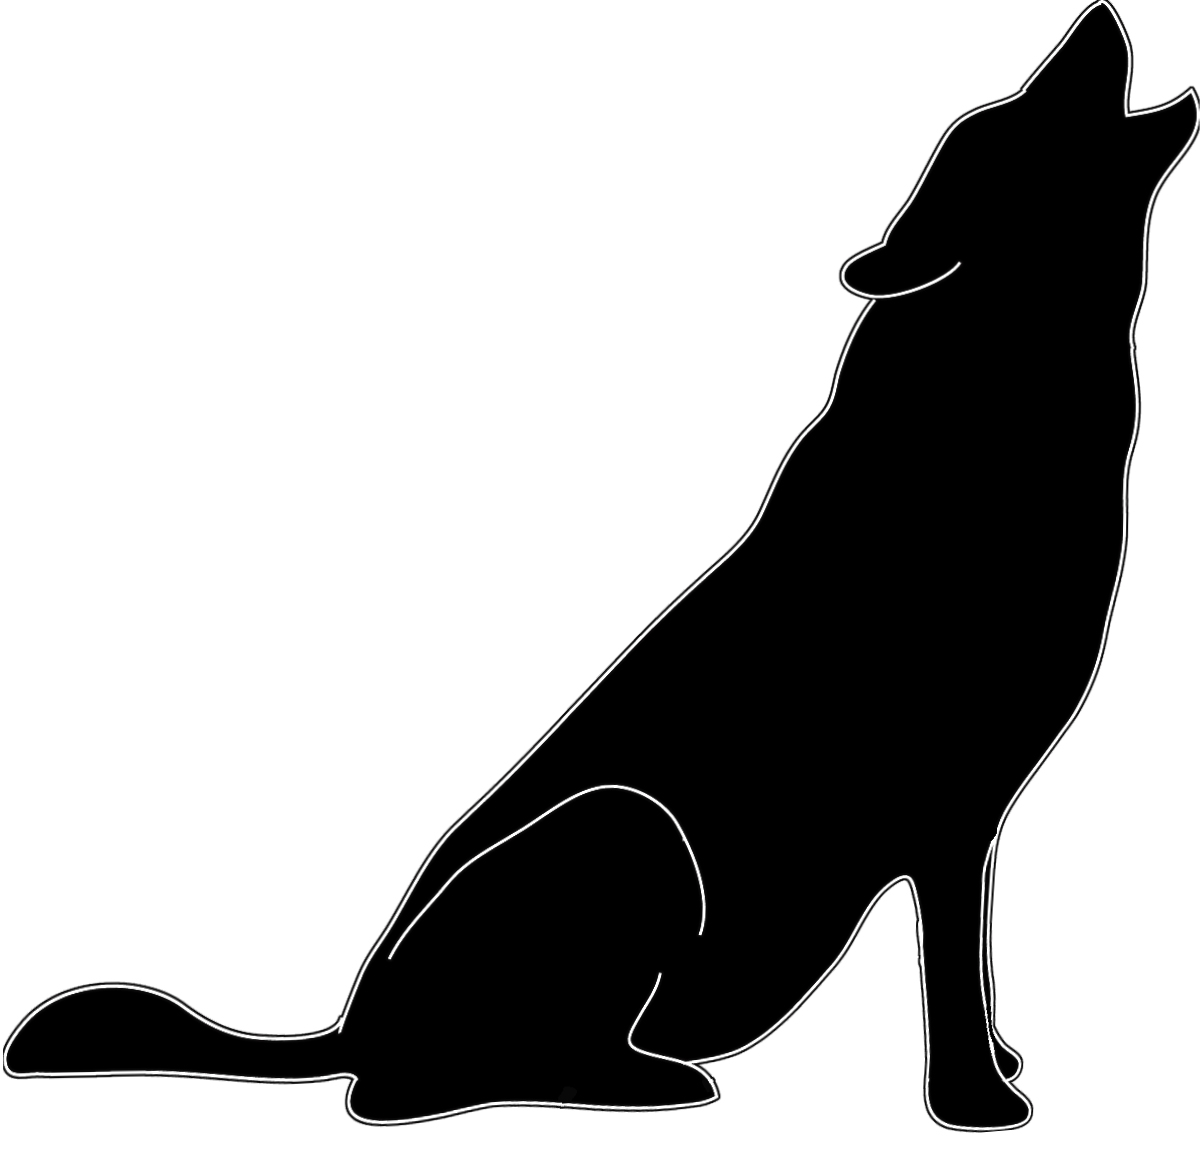 Coyote Silhouette Clip Art Free - ClipArt Best